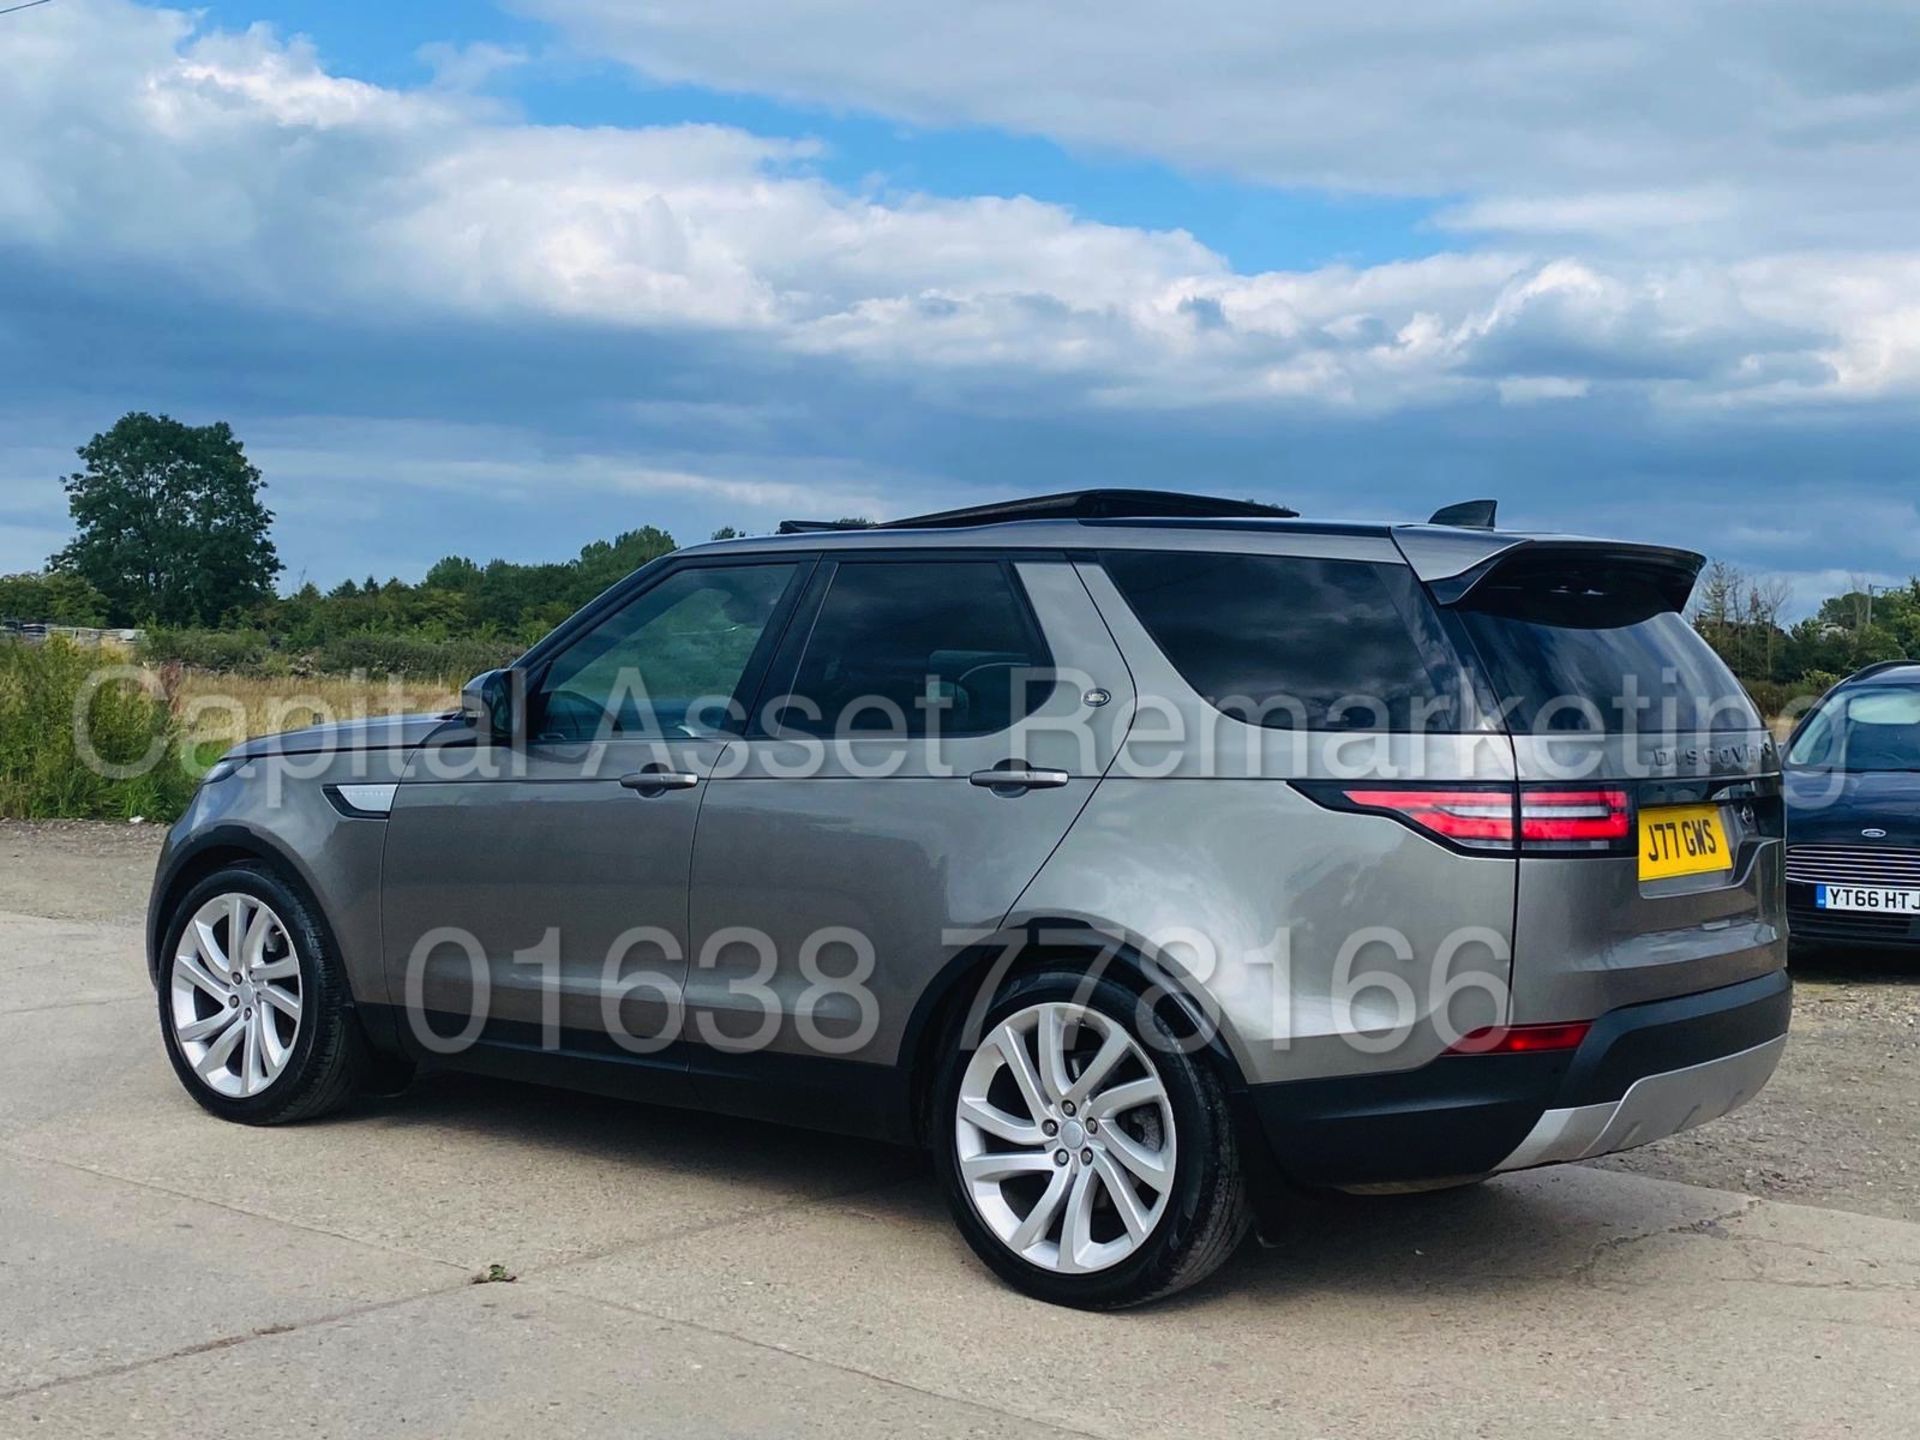 (On Sale) LAND ROVER DISCOVERY *HSE* 7 SEATER (2017 - NEW MODEL) '3.0 TD6 - 258 BHP - 8 SPEED AUTO' - Image 9 of 68